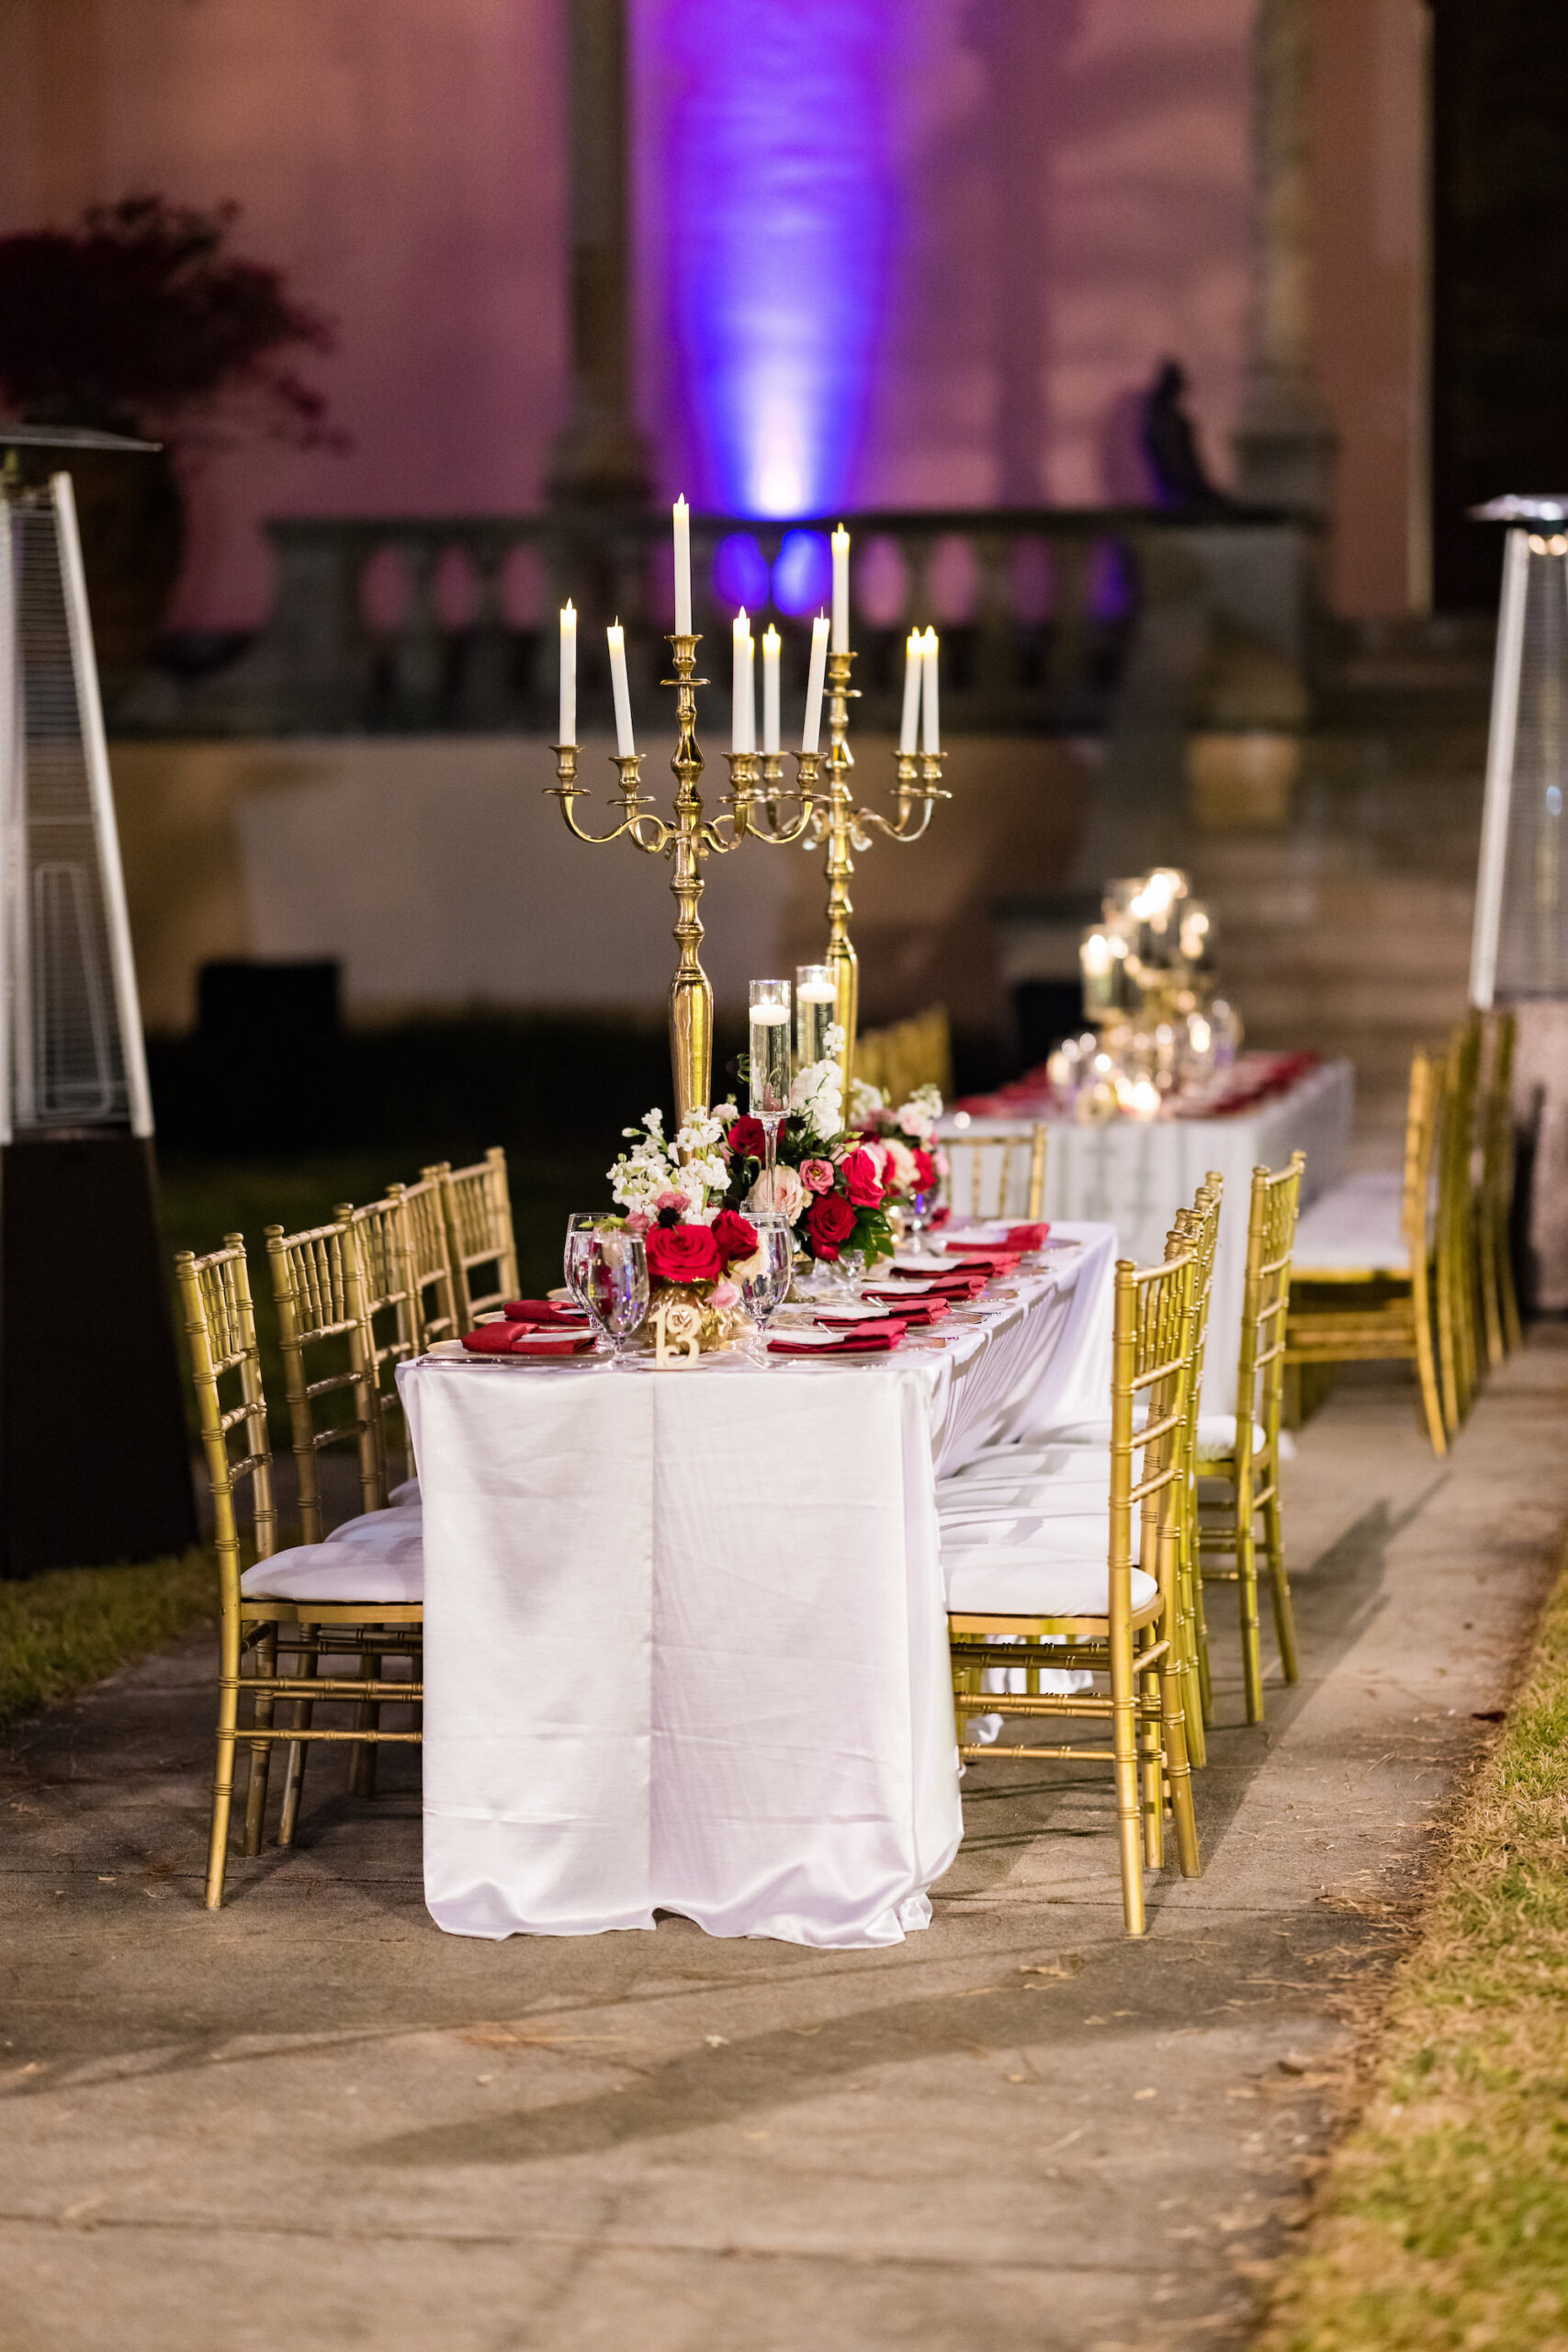 Gold Candelabra Wedding Reception Centerpieces with Red, Burgundy, and White Rose Floral Arrangements Ideas | Gold Chiavari Chairs